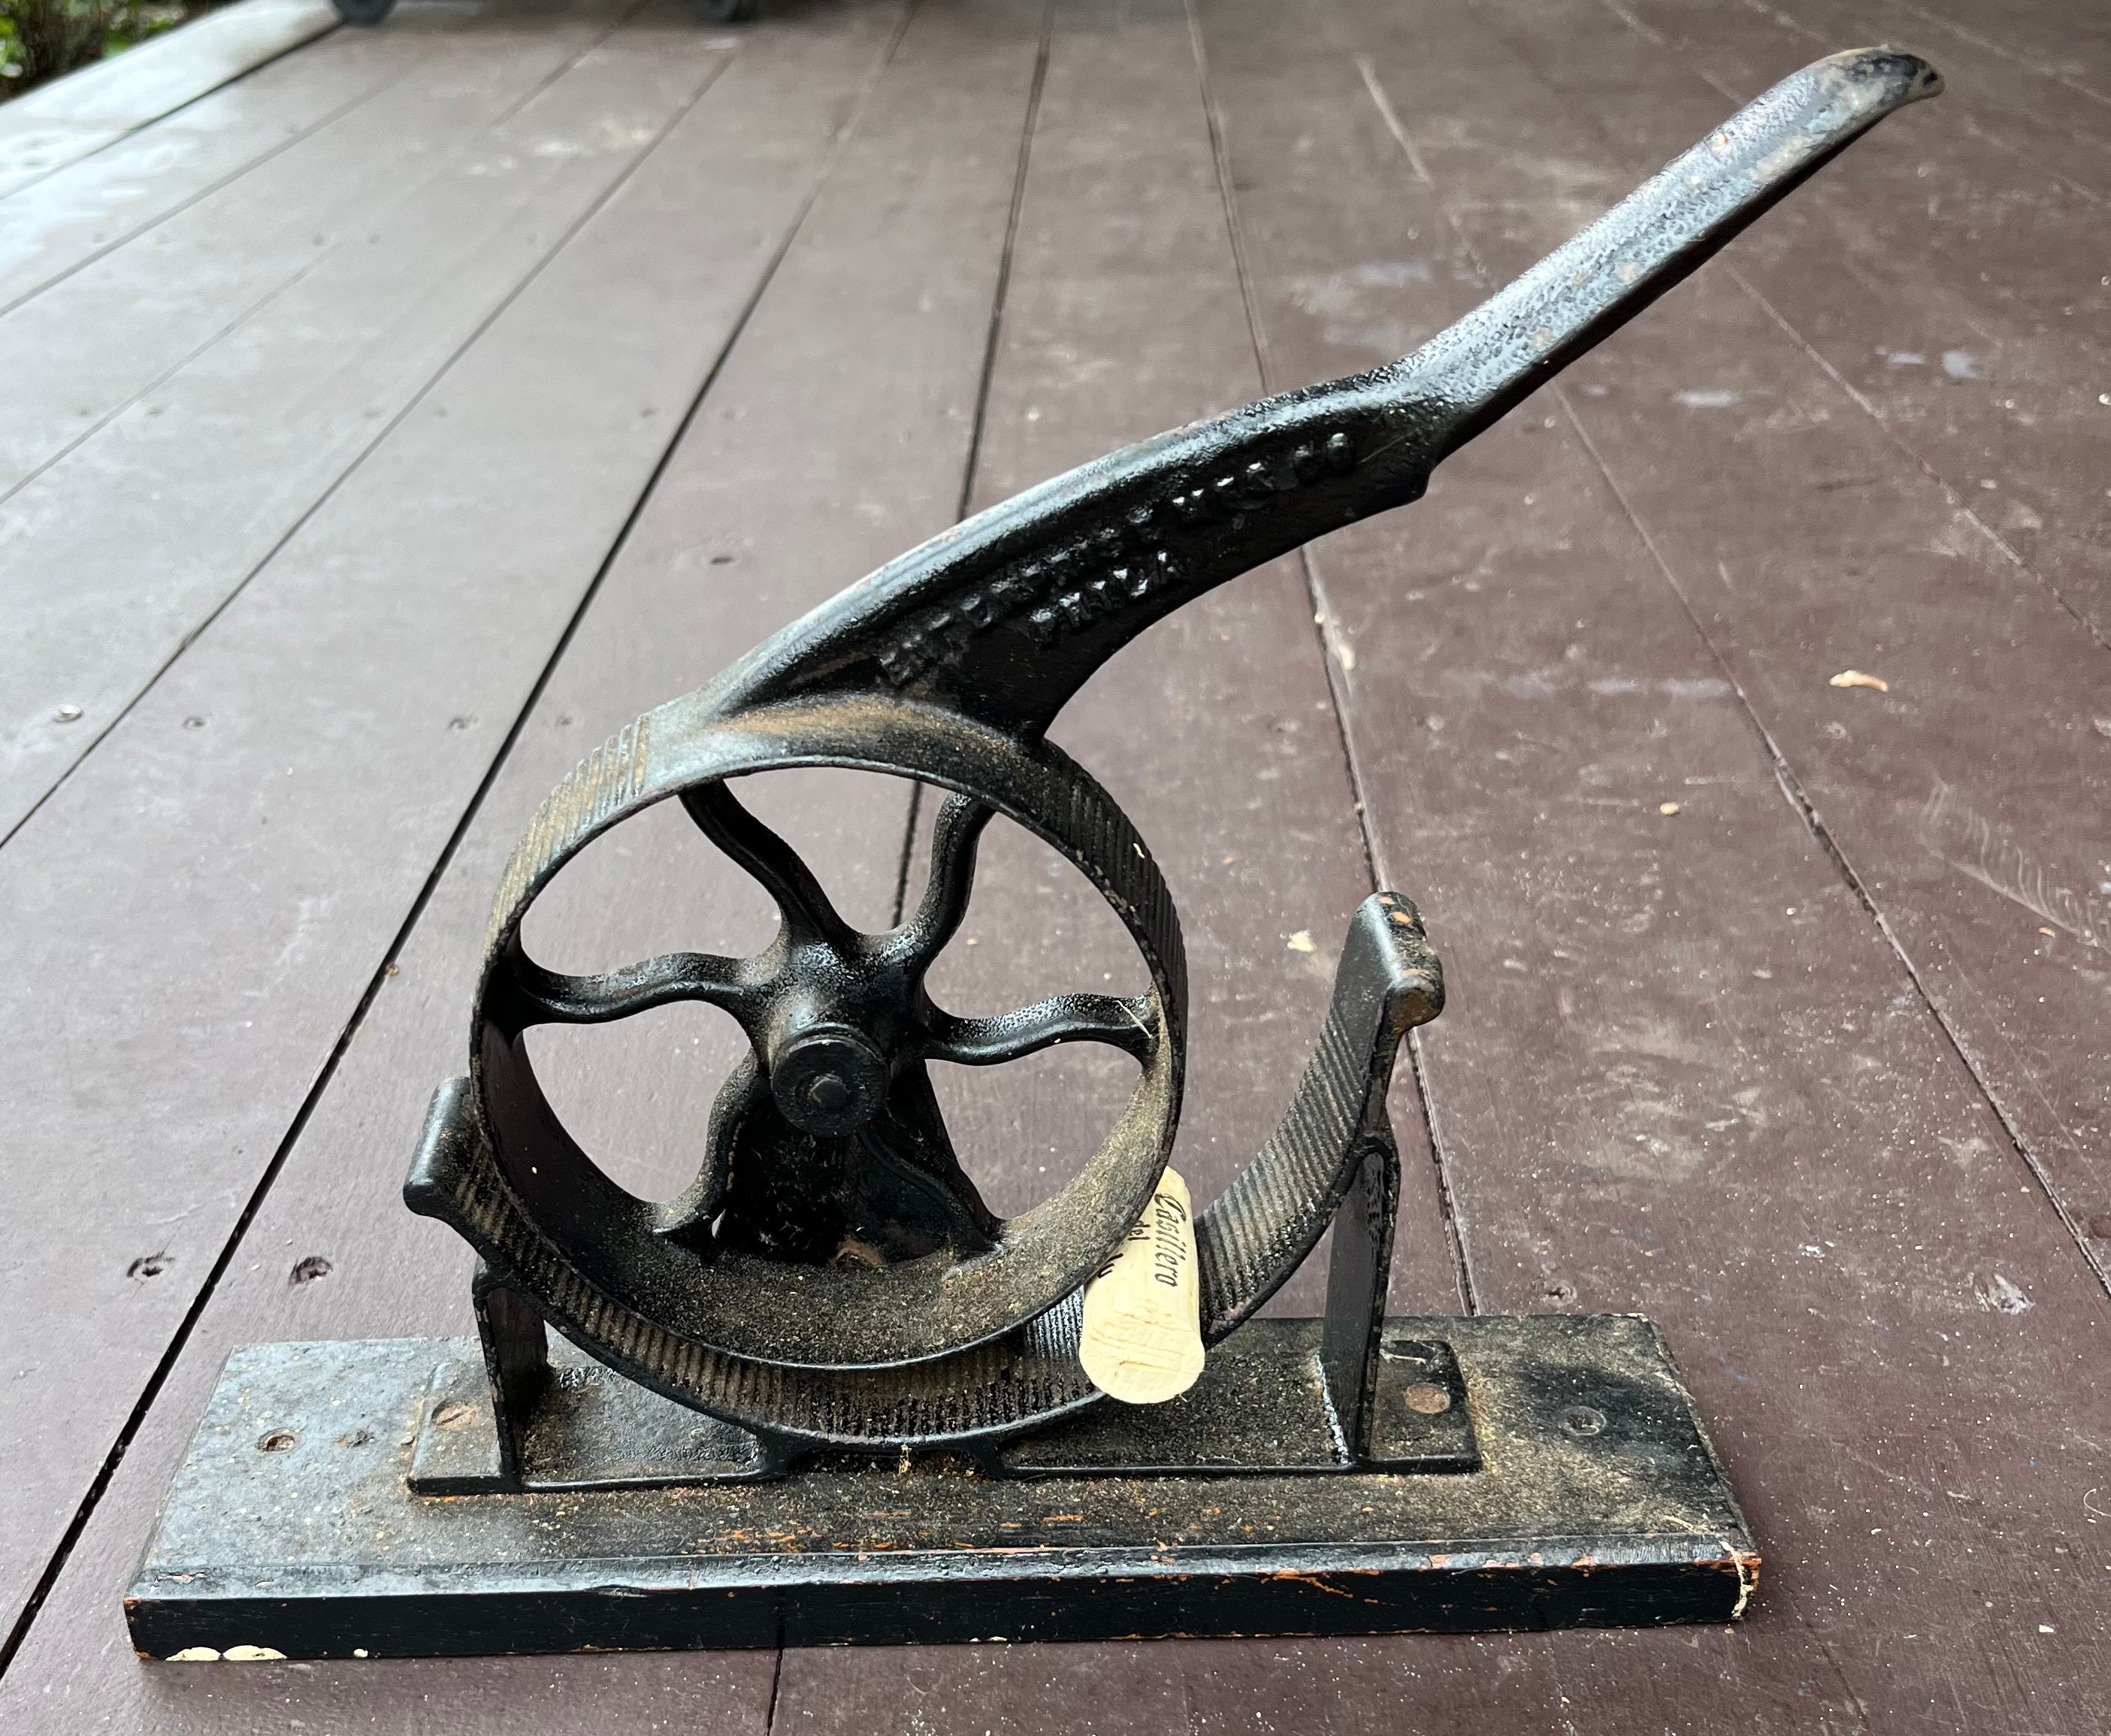 Antique Cast Iron Book Press with Figures, 1850s for sale at Pamono